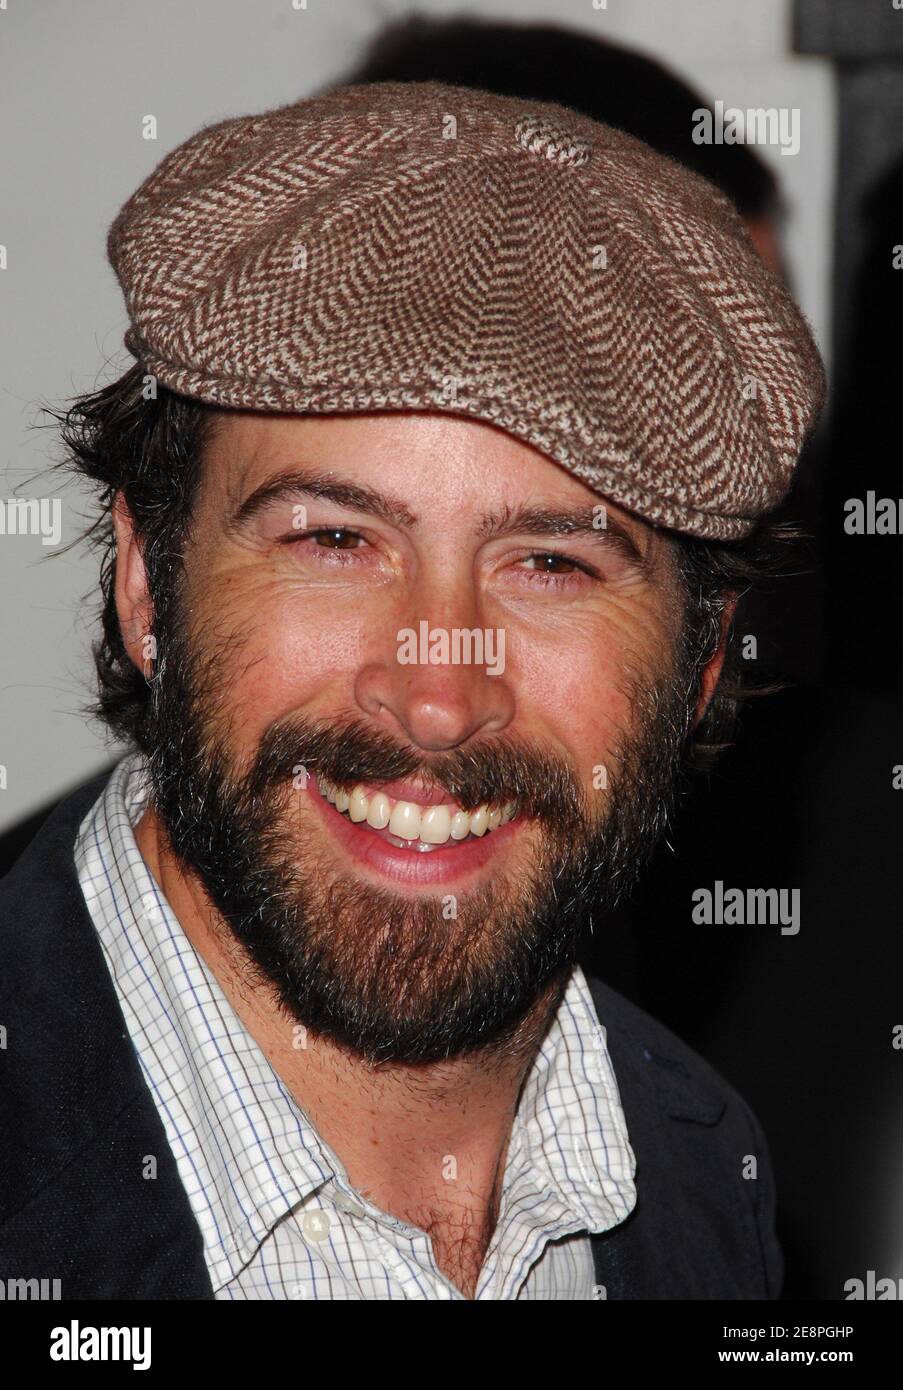 Actor Jason Lee attends the premiere of 'Underdog' held at the Regal E-Walk Stadium 13 theater on Monday, July 30, 2007 in New York City, USA. Photo by Gregorio Binuya/ABACAUSA.COM (Pictured: Jason Lee) Stock Photo